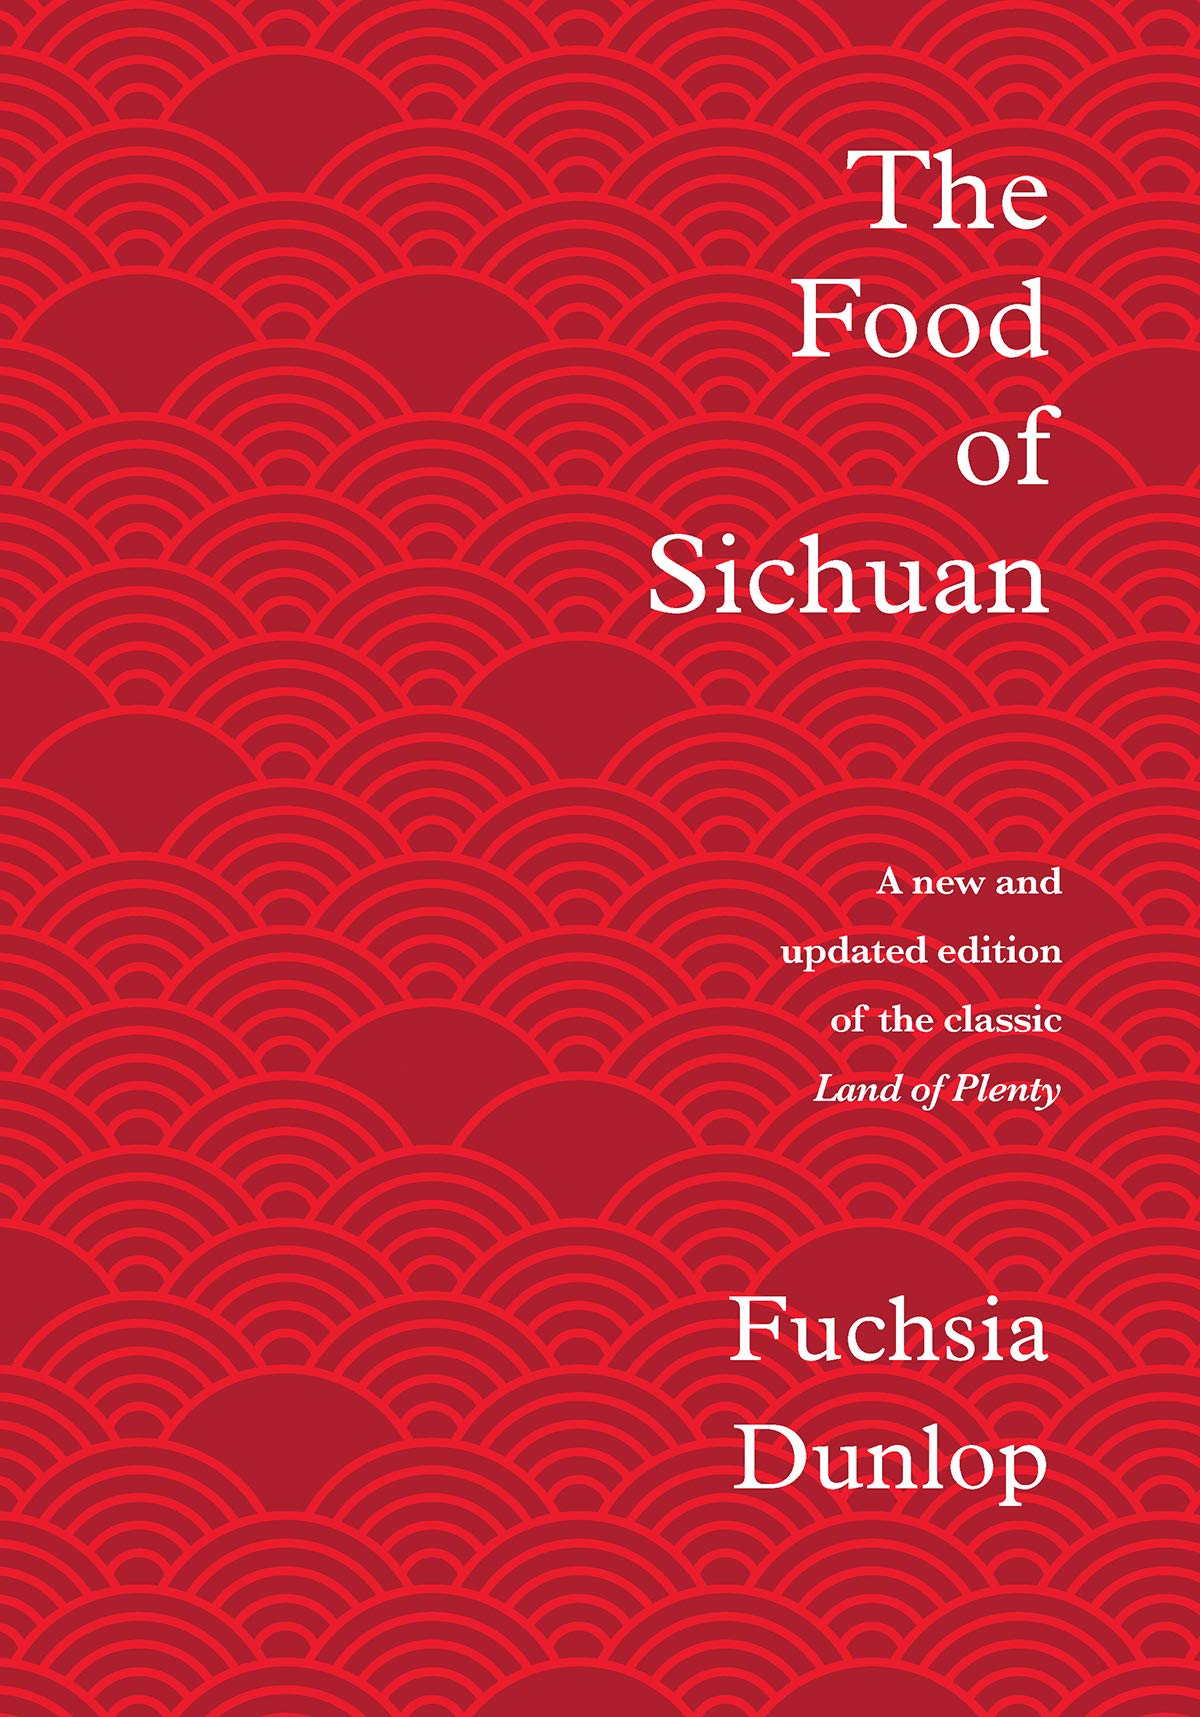 The Food of Sichan by Fuchsia Dunlop